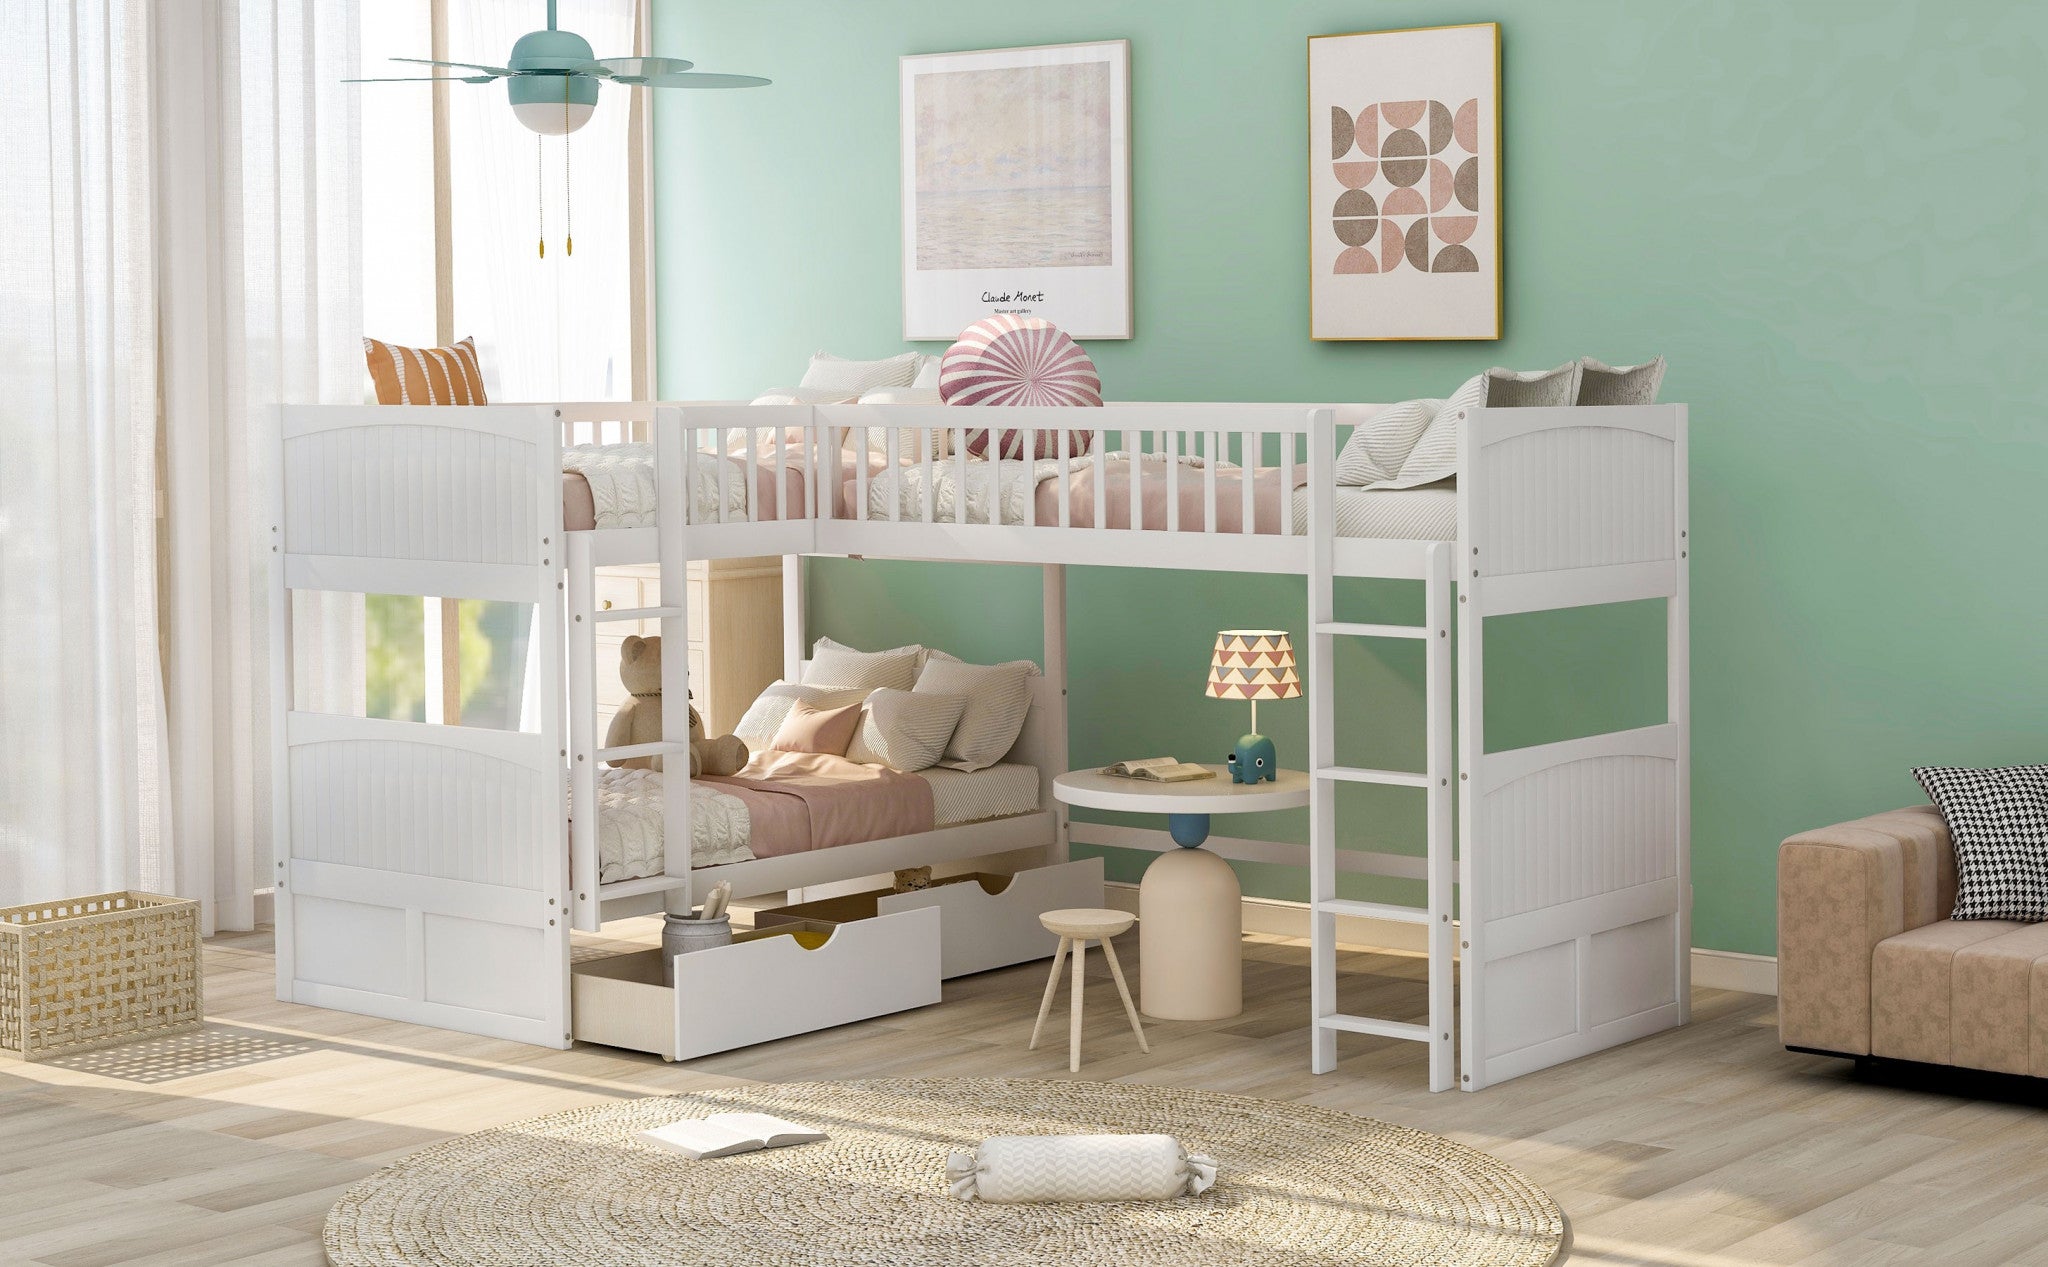 White Twin Size Bunk Bed with attached Loft Bed and Drawers Default Title